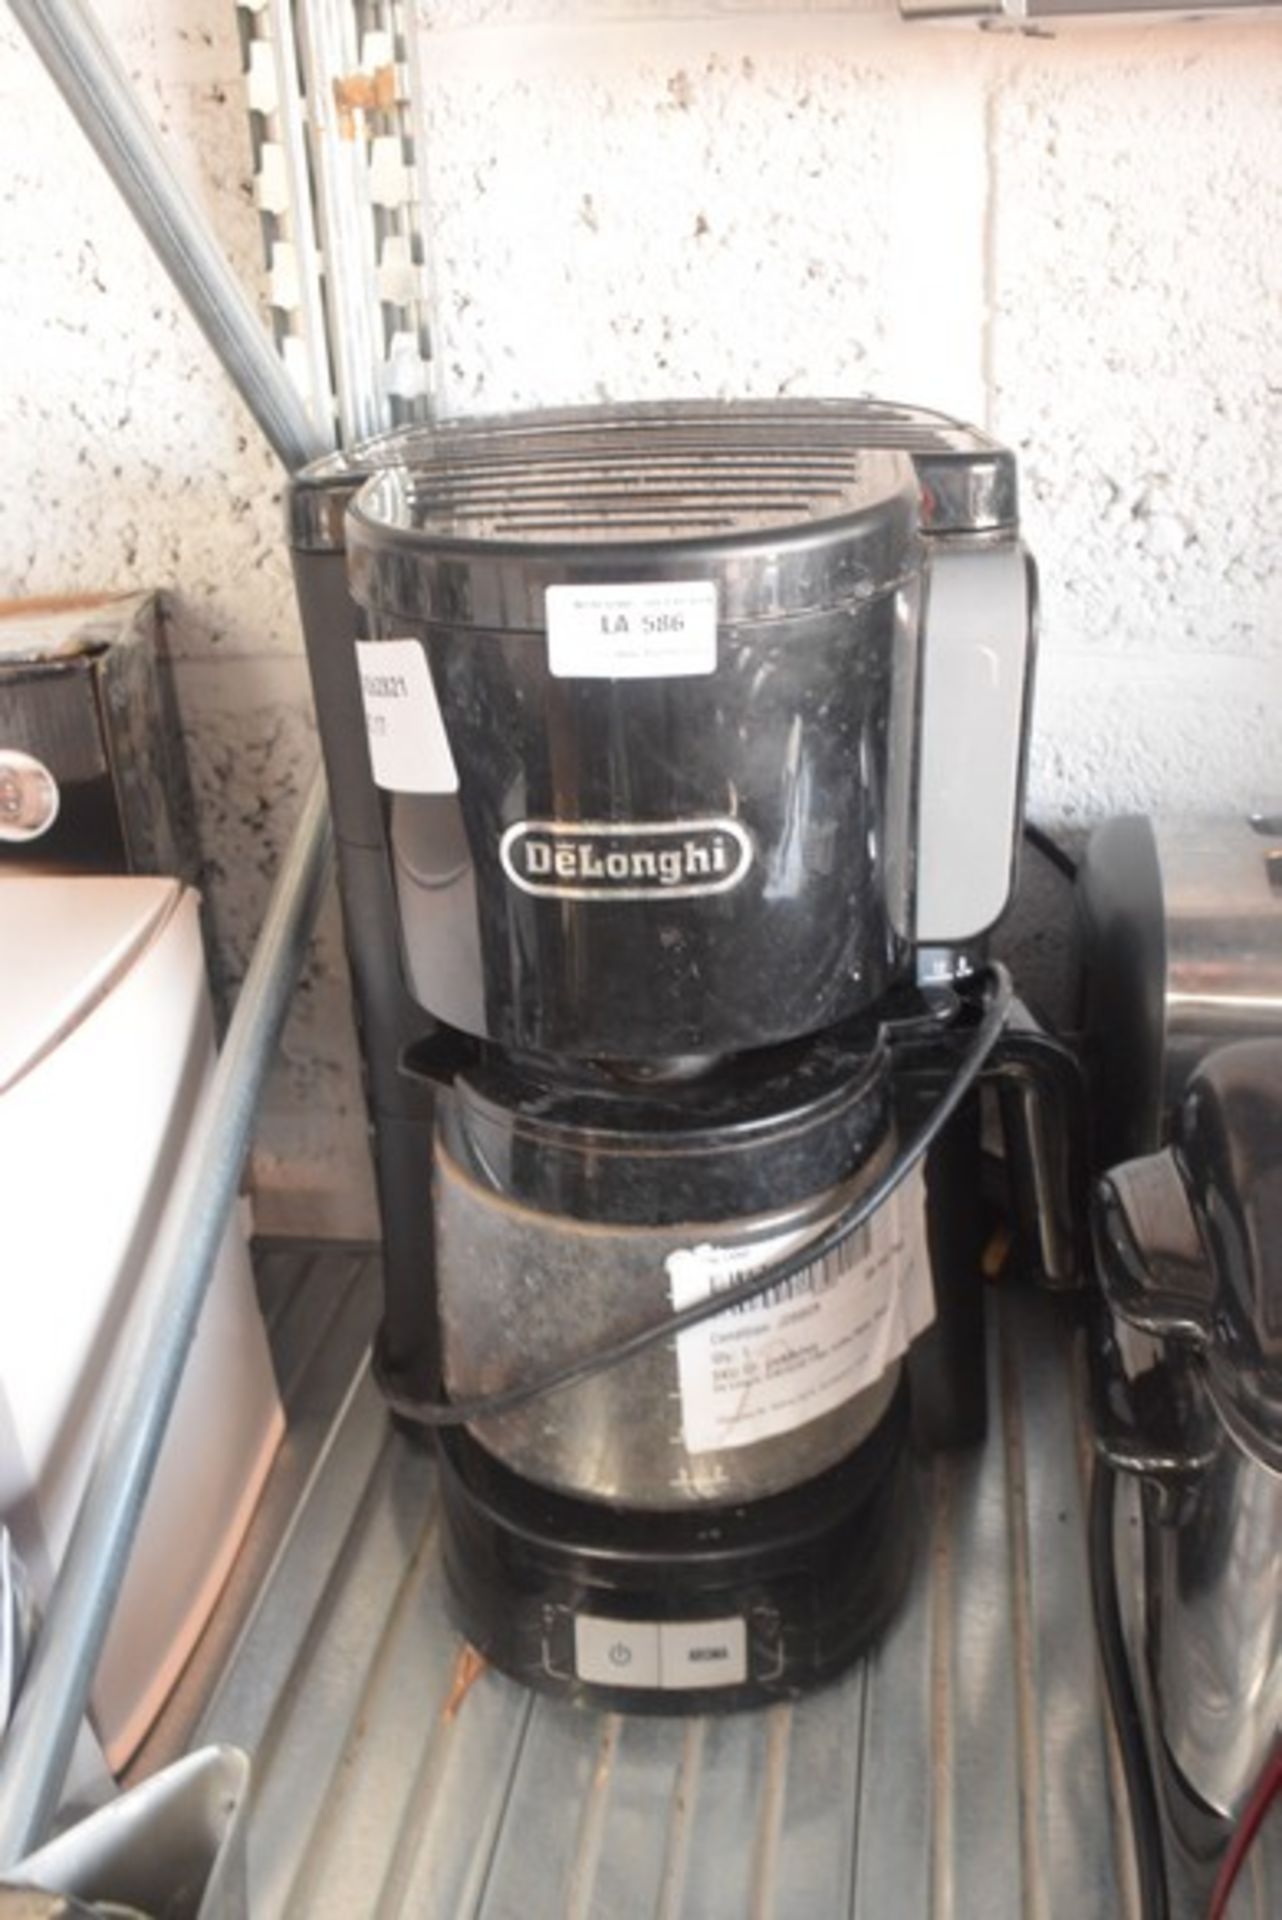 1 x DELONGHI FILTER COFFEE MACHINE RRP £45 24/07/17 *PLEASE NOTE THAT THE BID PRICE IS MULTIPLIED BY